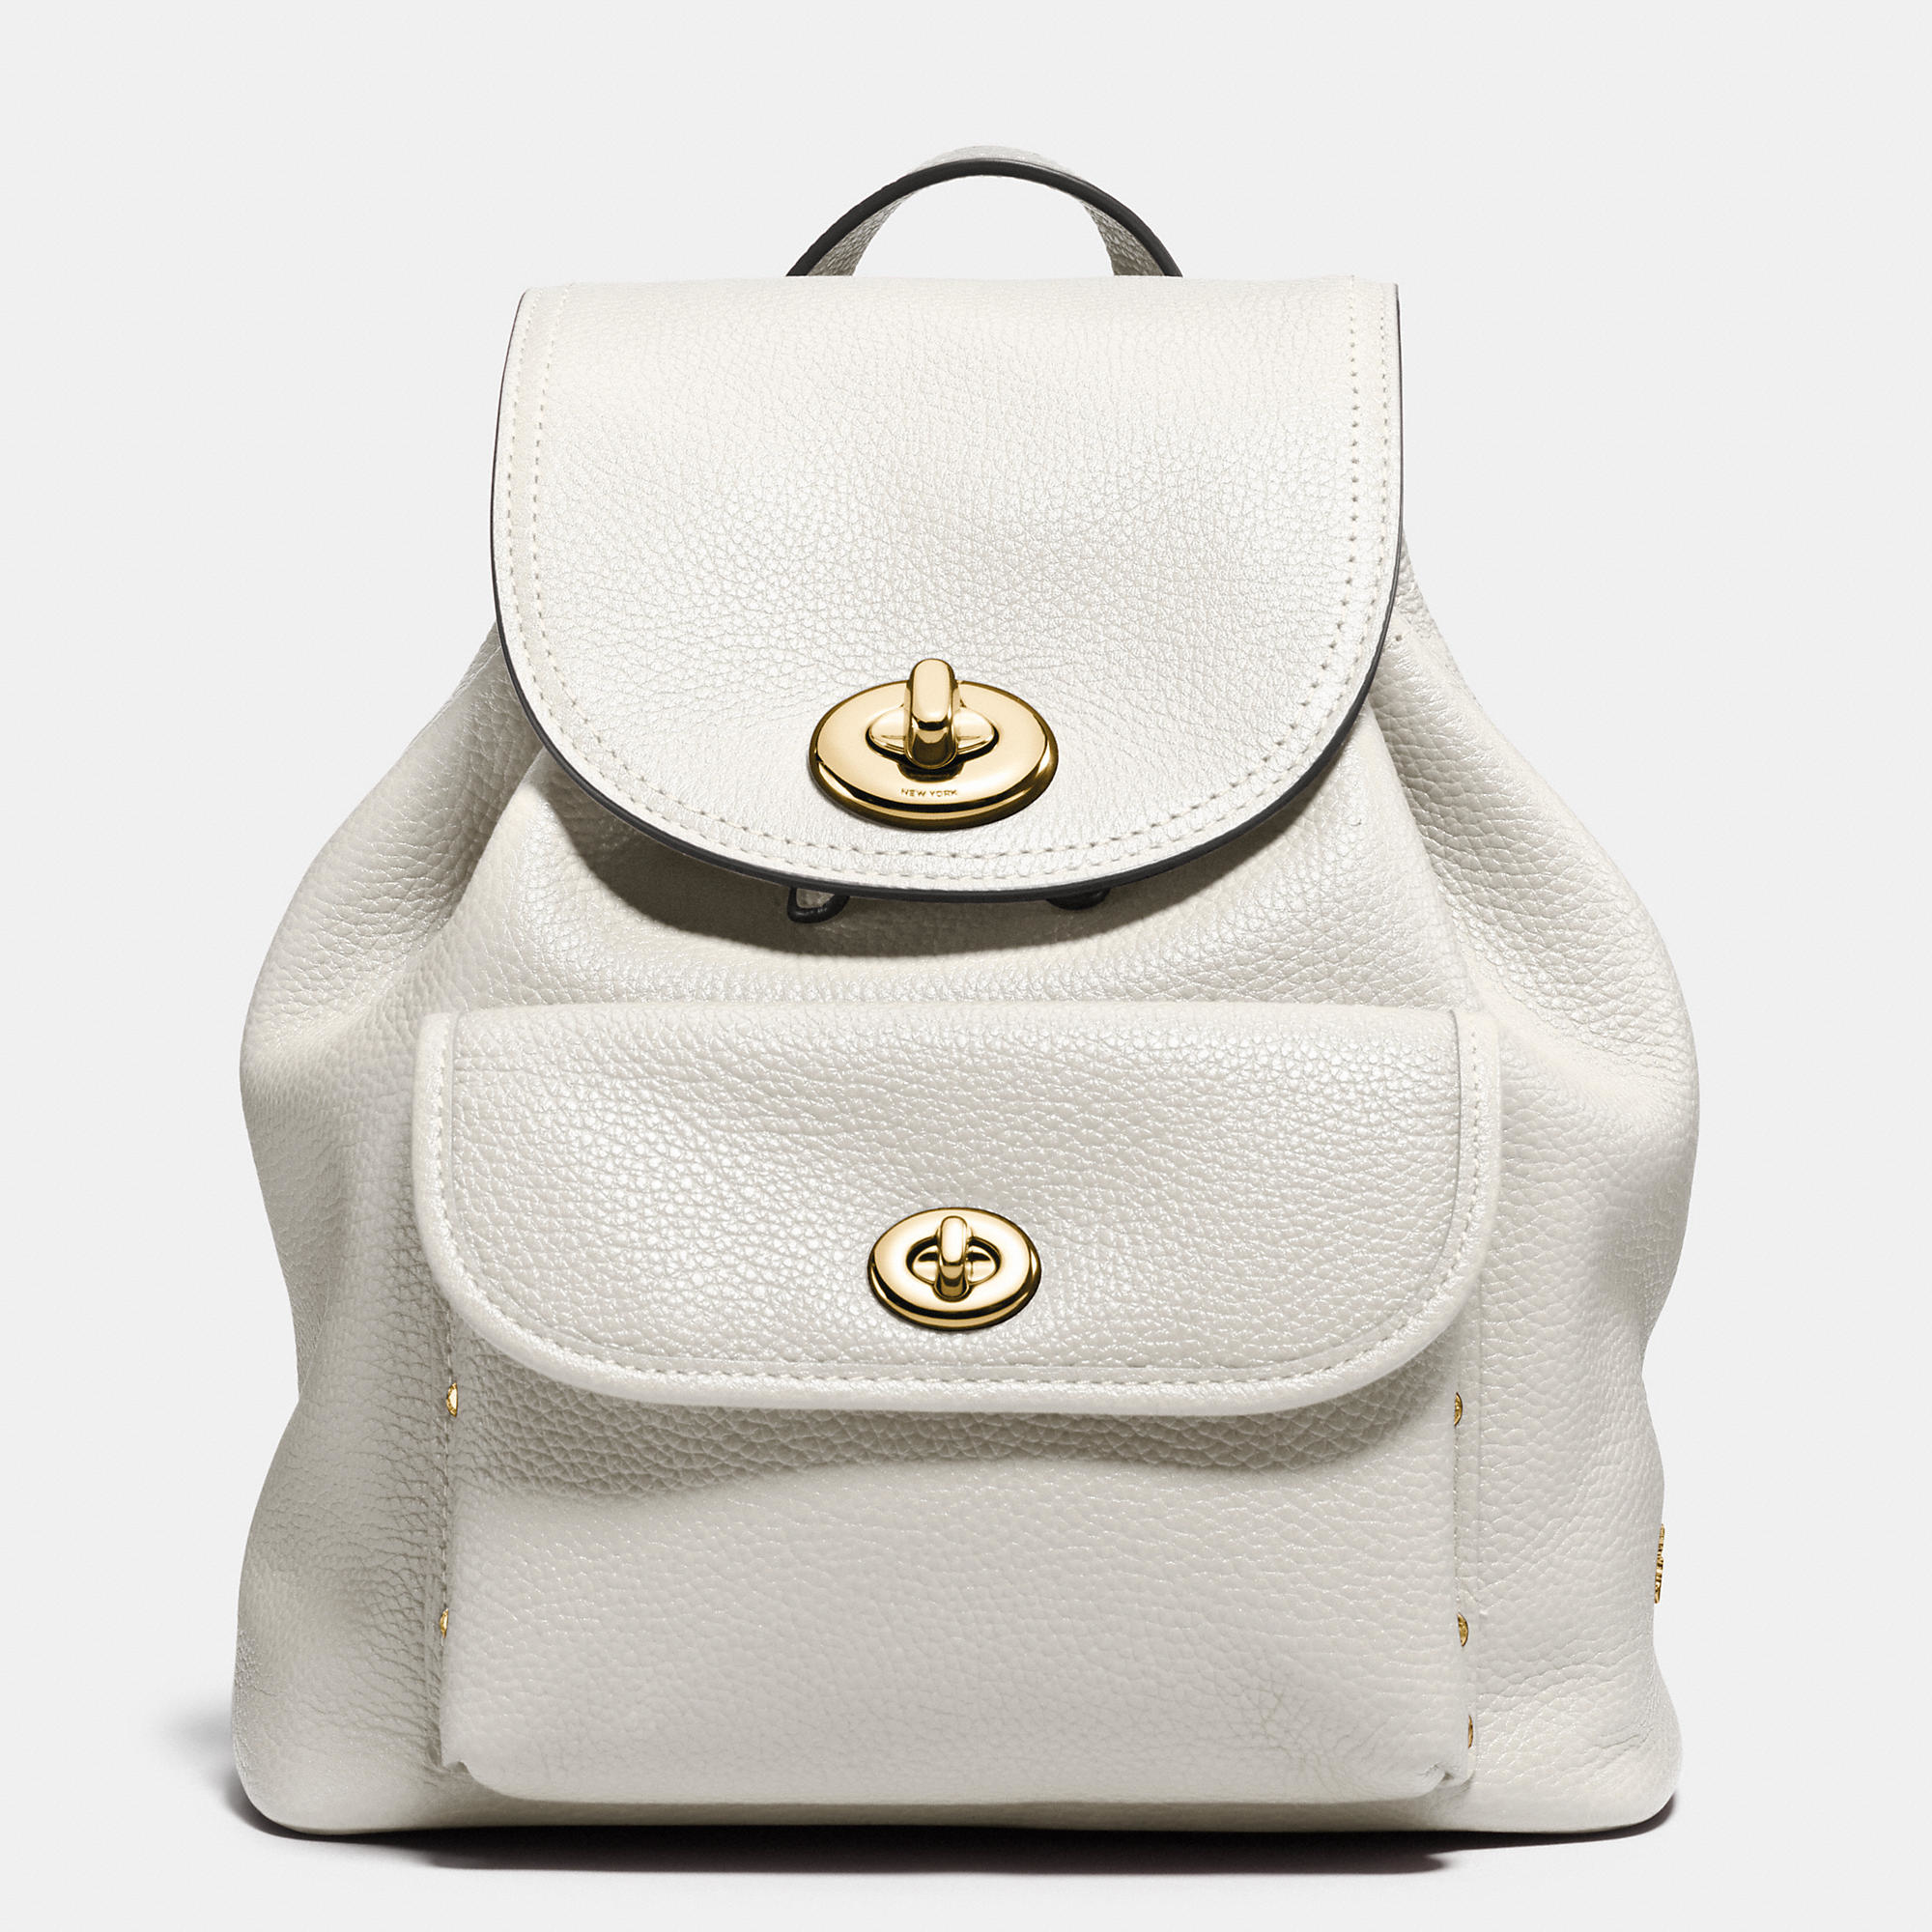 COACH Mini Turnlock Rucksack In Pebble Leather in Light Gold/Chalk (White)  | Lyst